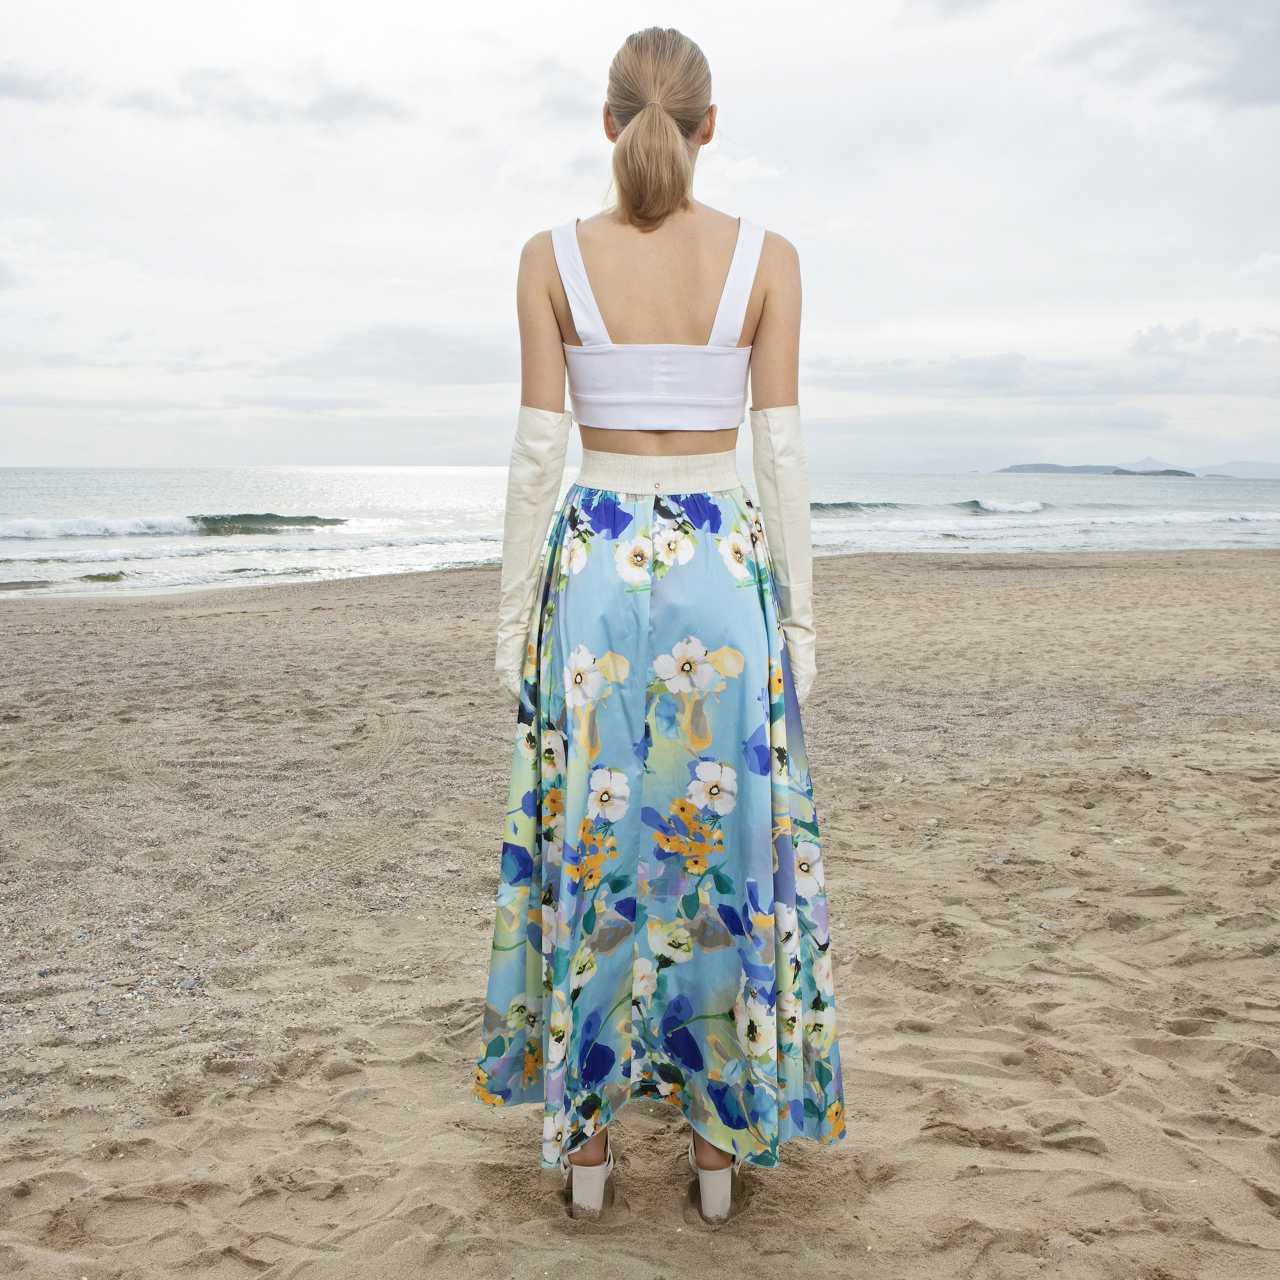 Product preview: Tulle Tutu Skirt Maxi Patterned Shades of Blue Skirt